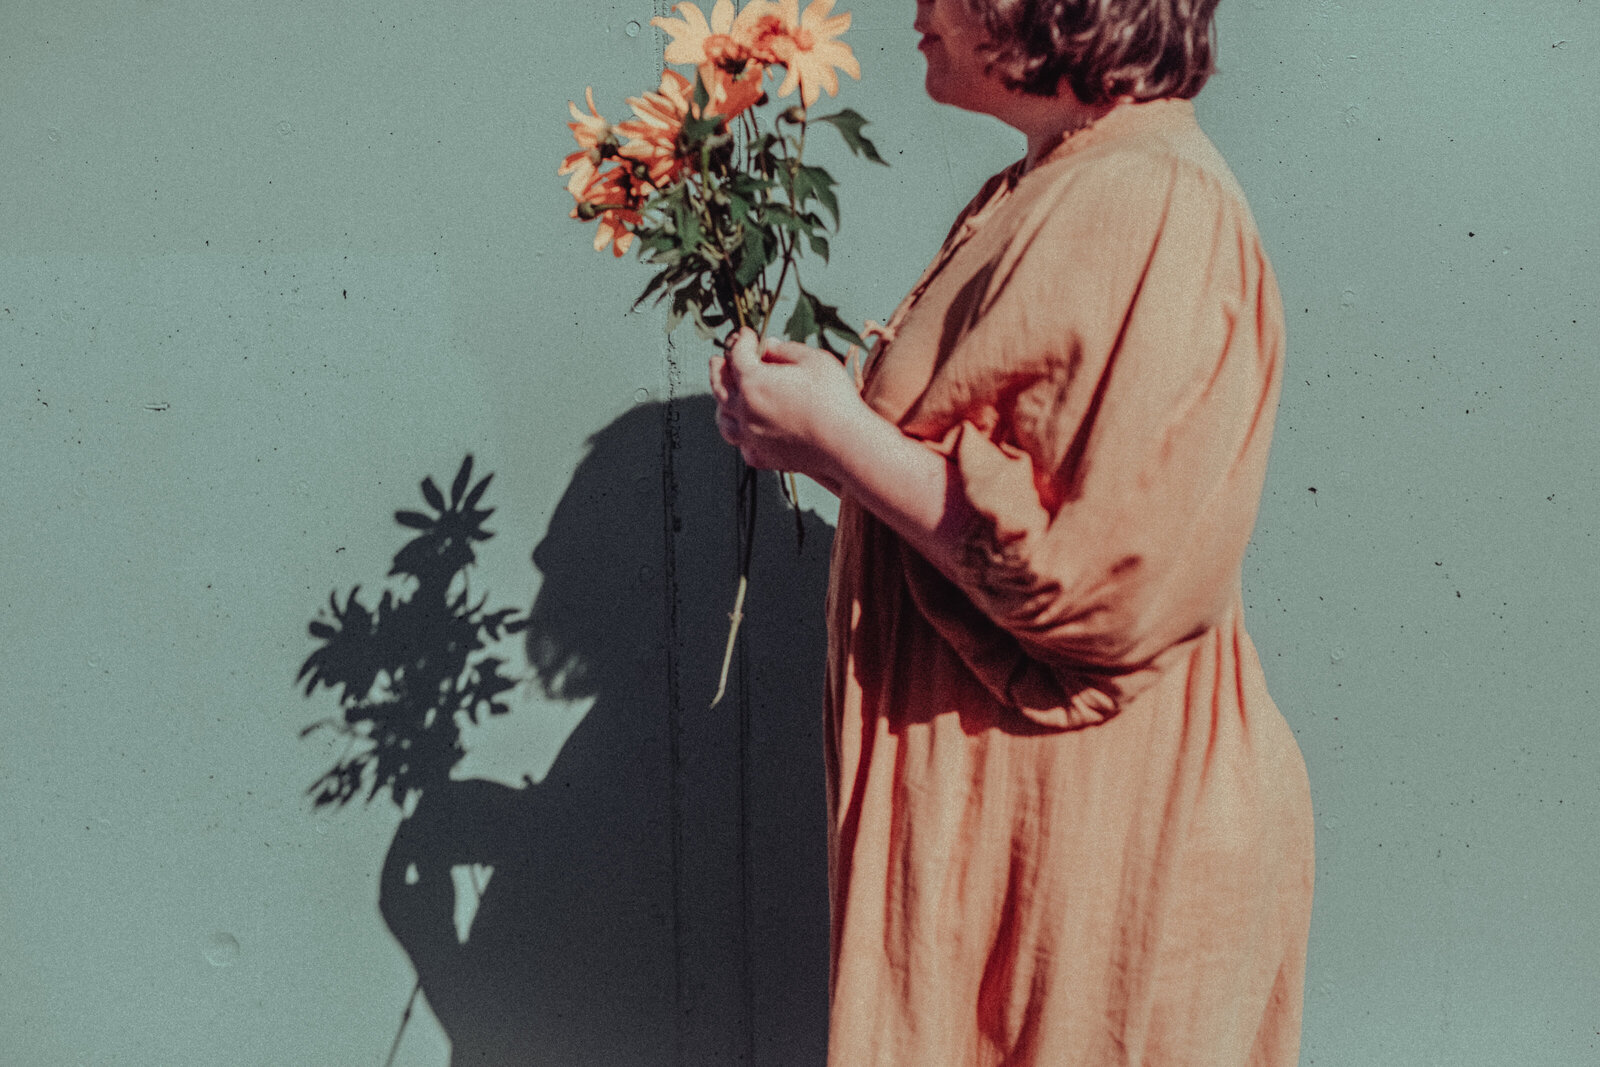 Woman posing with flowers in a branding photography session